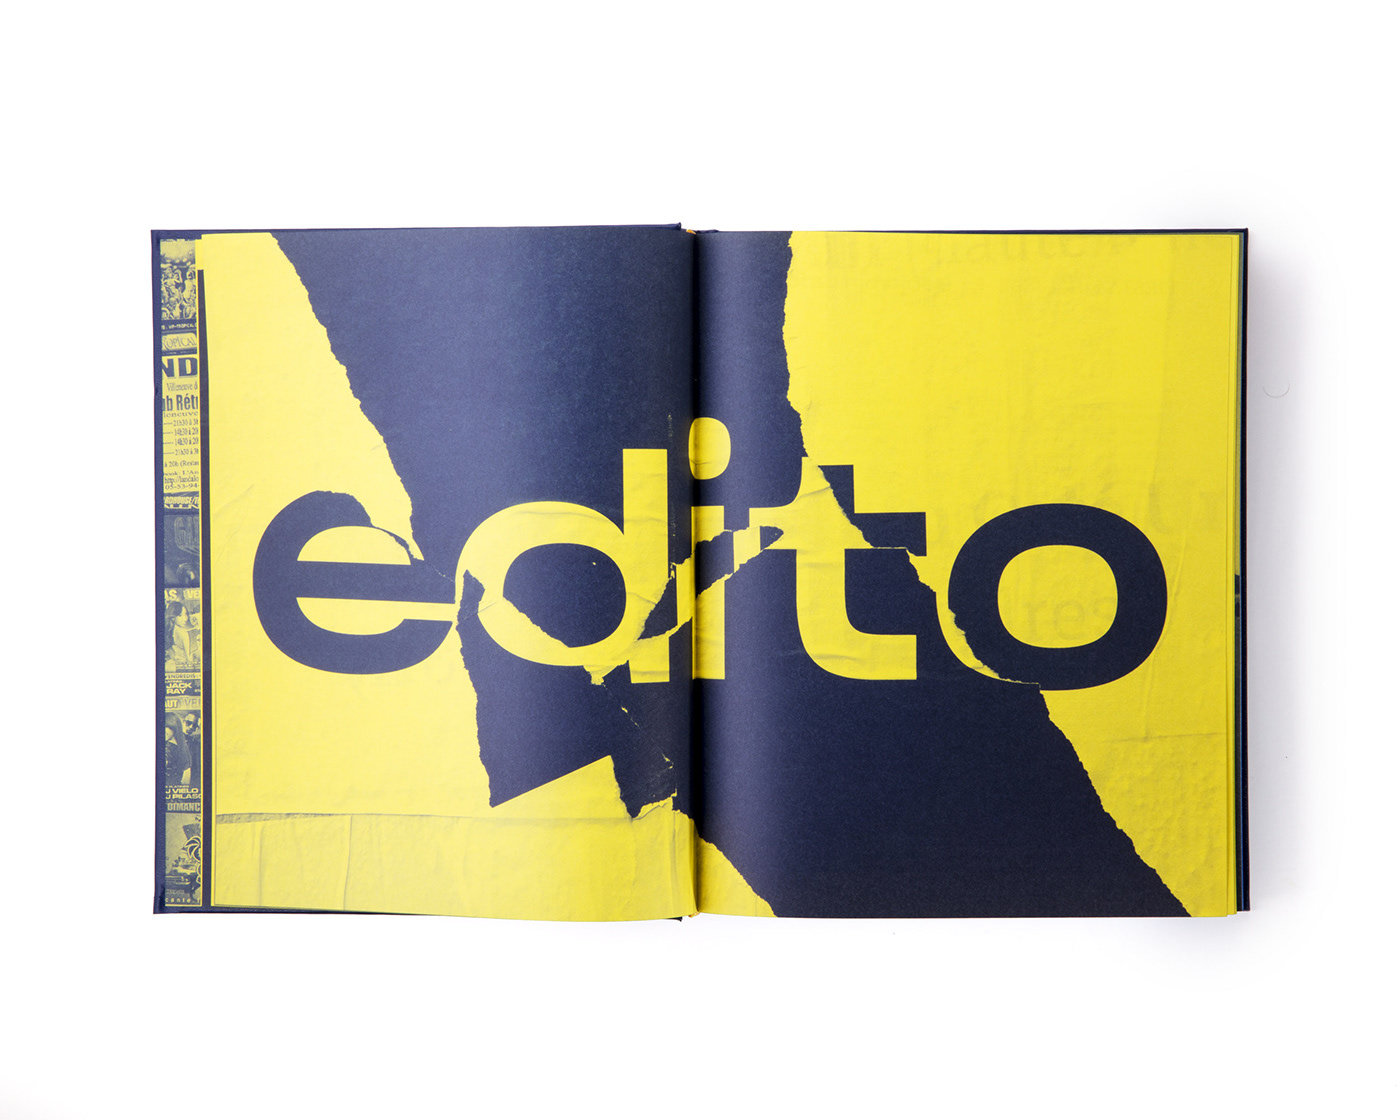 after party livre nightclubs france blue typography   EdBanger Photography  architecture book